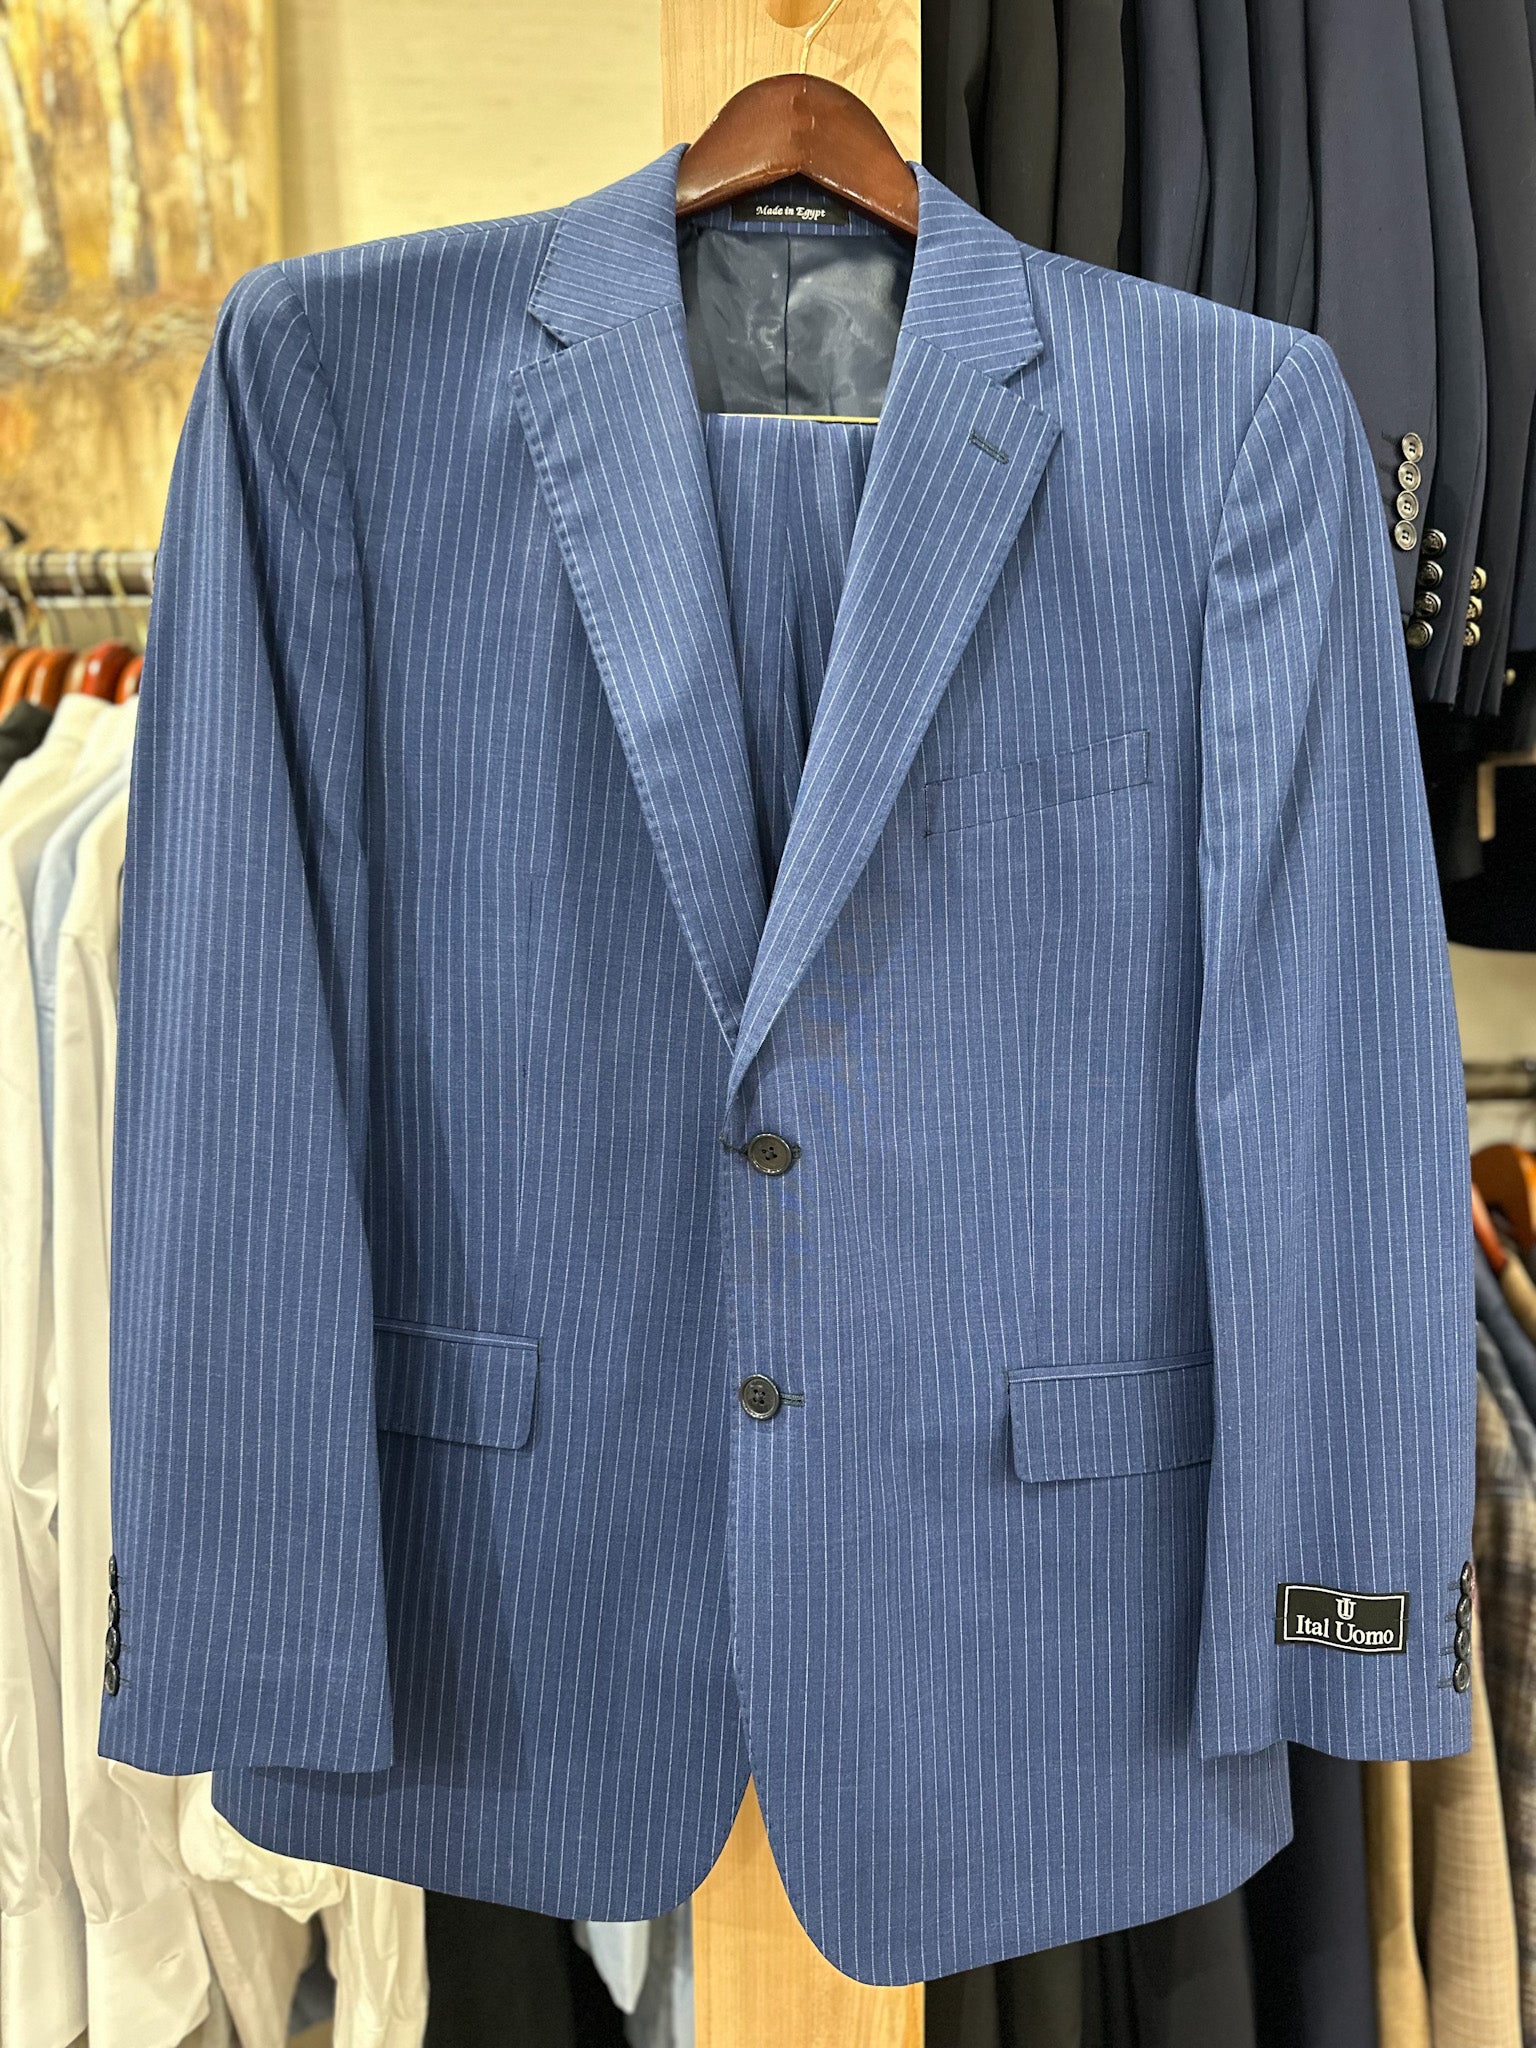 Ital Uomo Pinstripe Suit - FRENCH BLUE